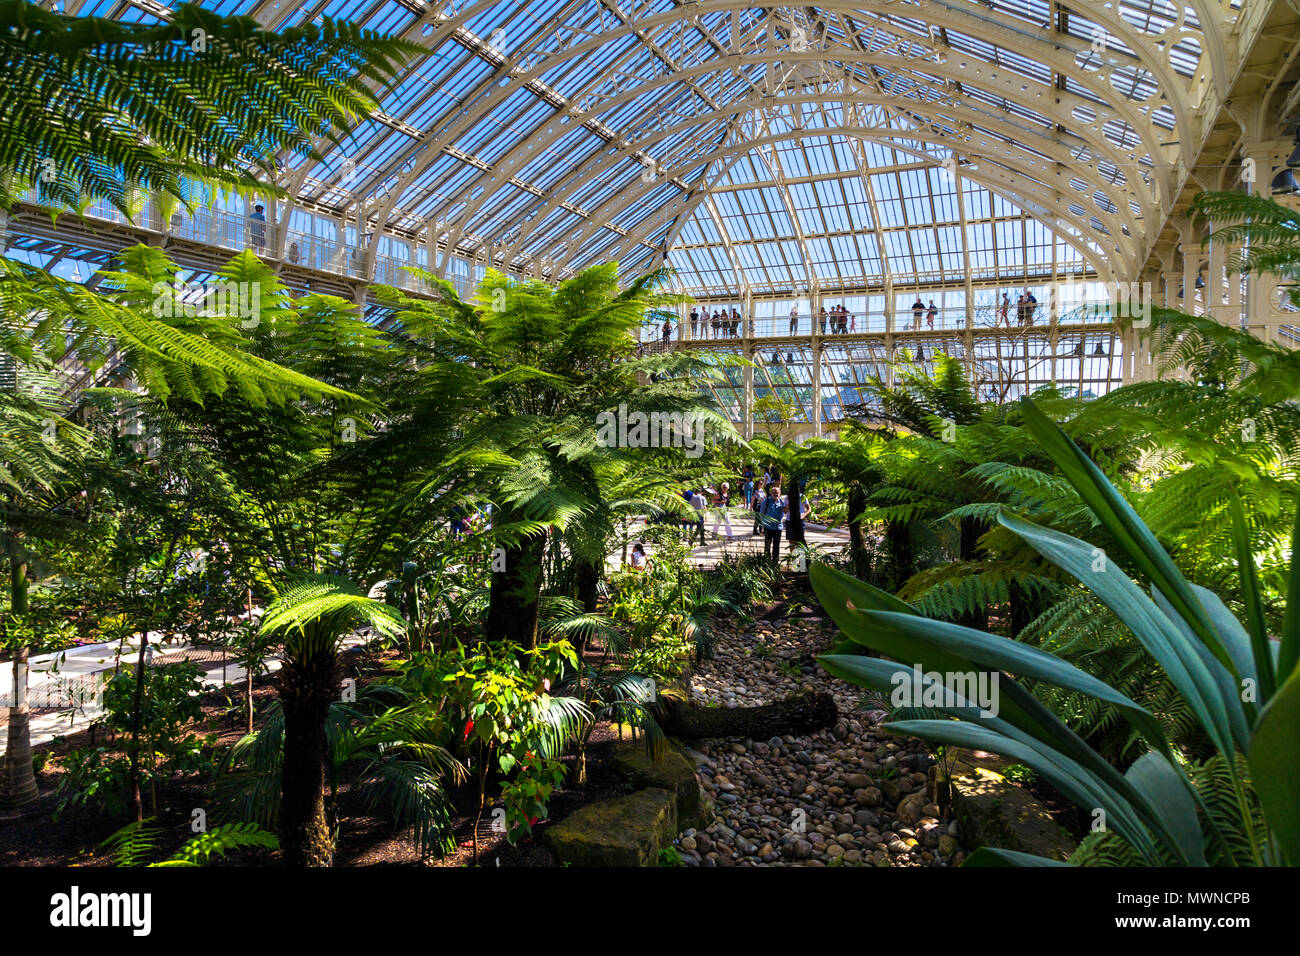 Newly refurbished and reopened Temperate House in Kew Gardens, London, UK Stock Photo